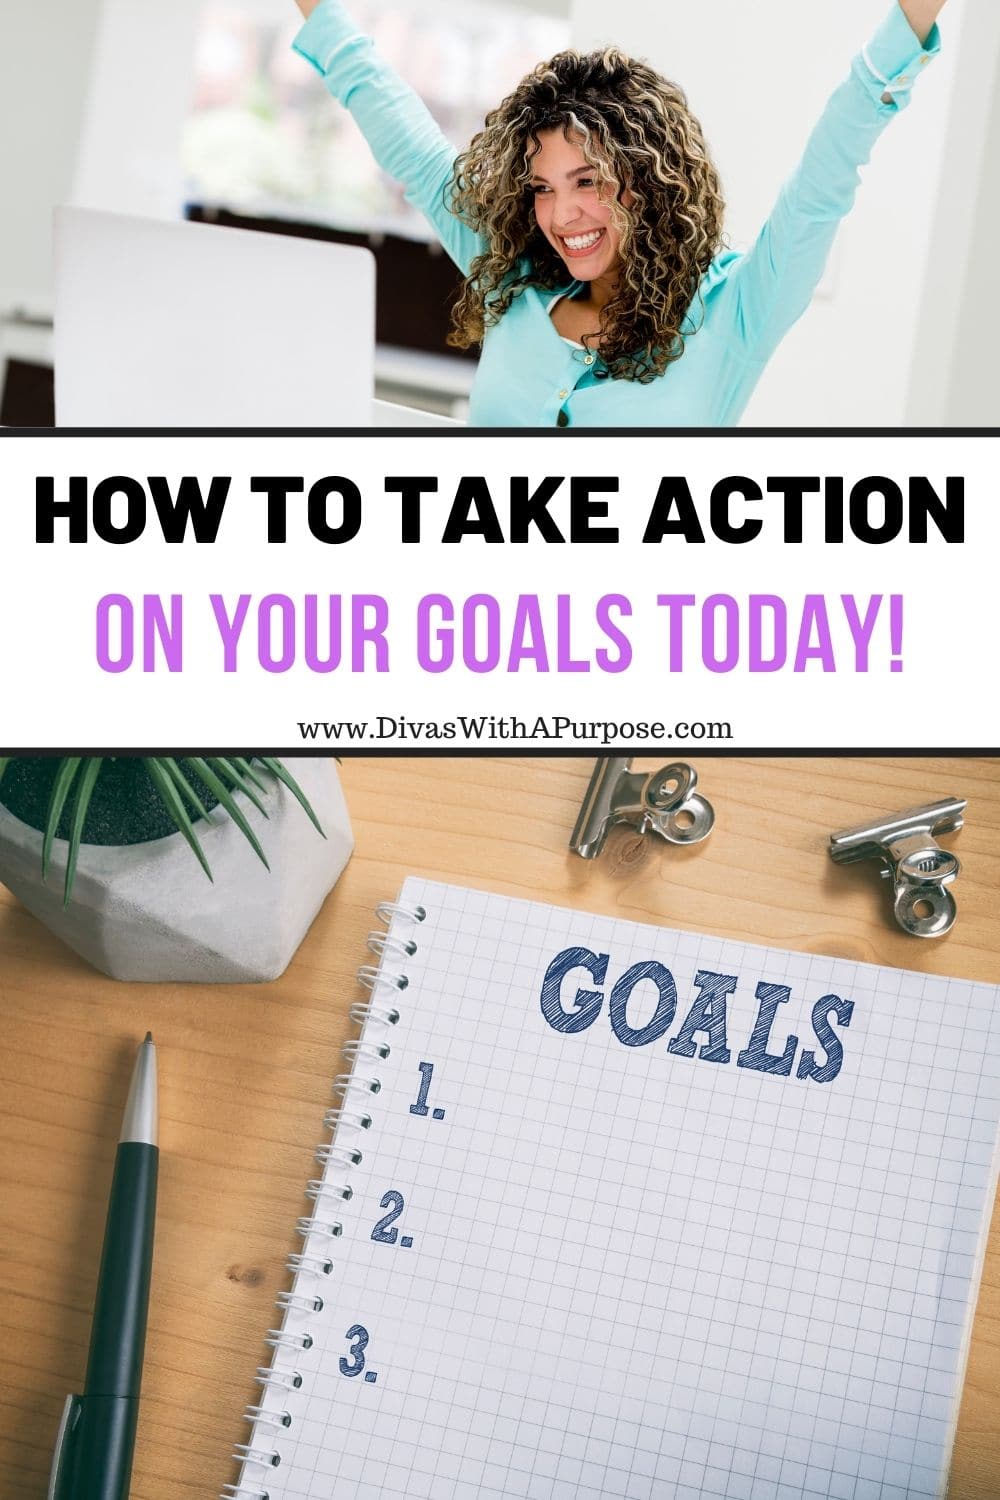 To take action, you first have to believe your goal is possible. Once you start taking action on your goals, they will become reality.